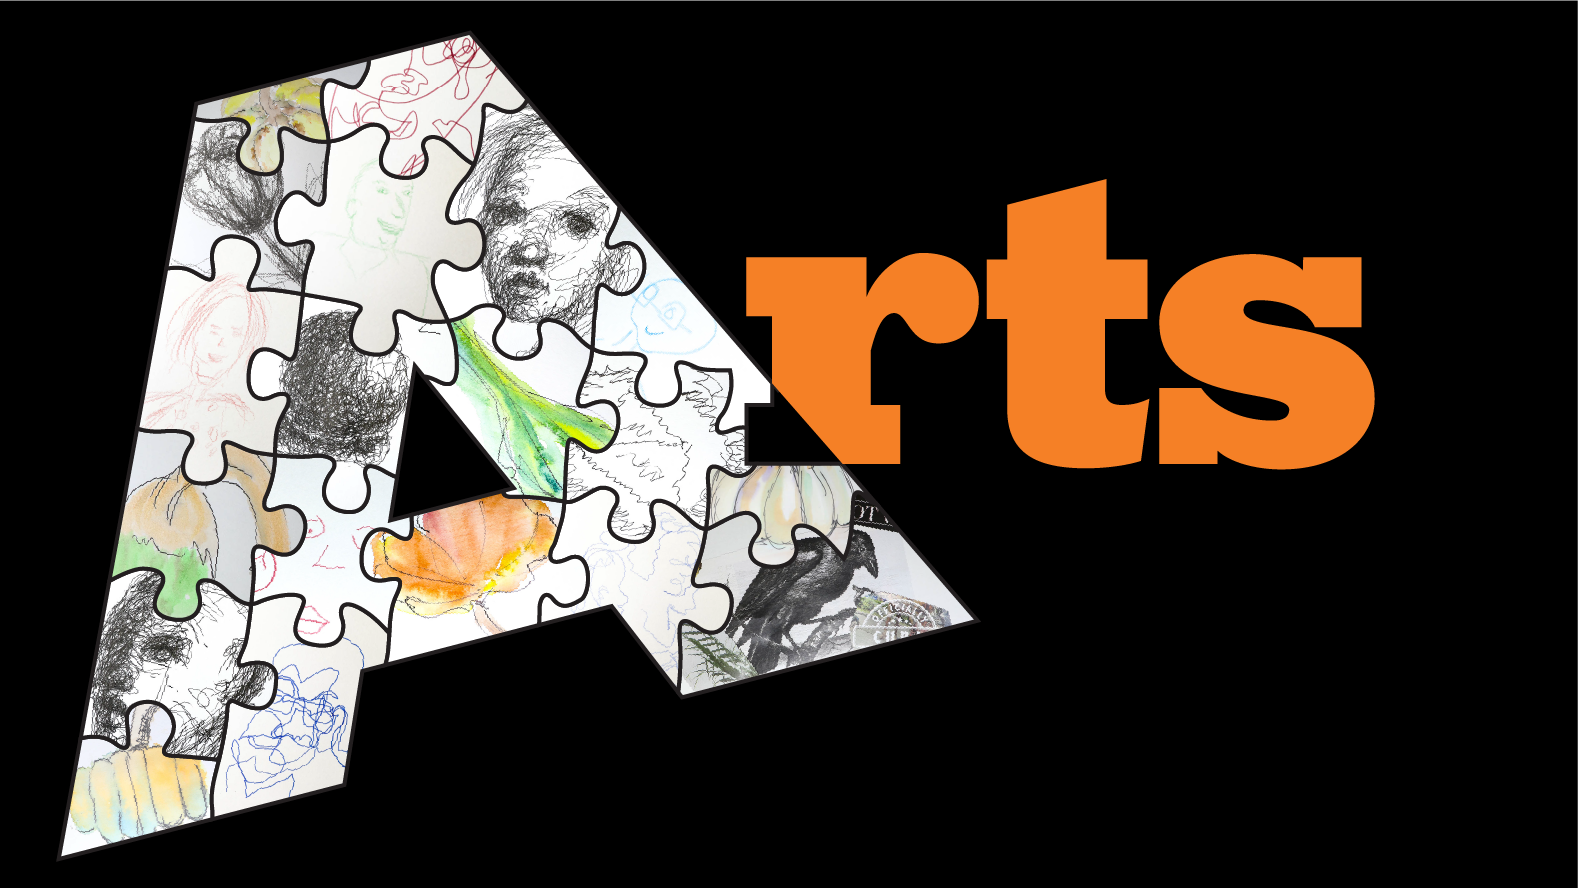 Arts with the A as a puzzle piece